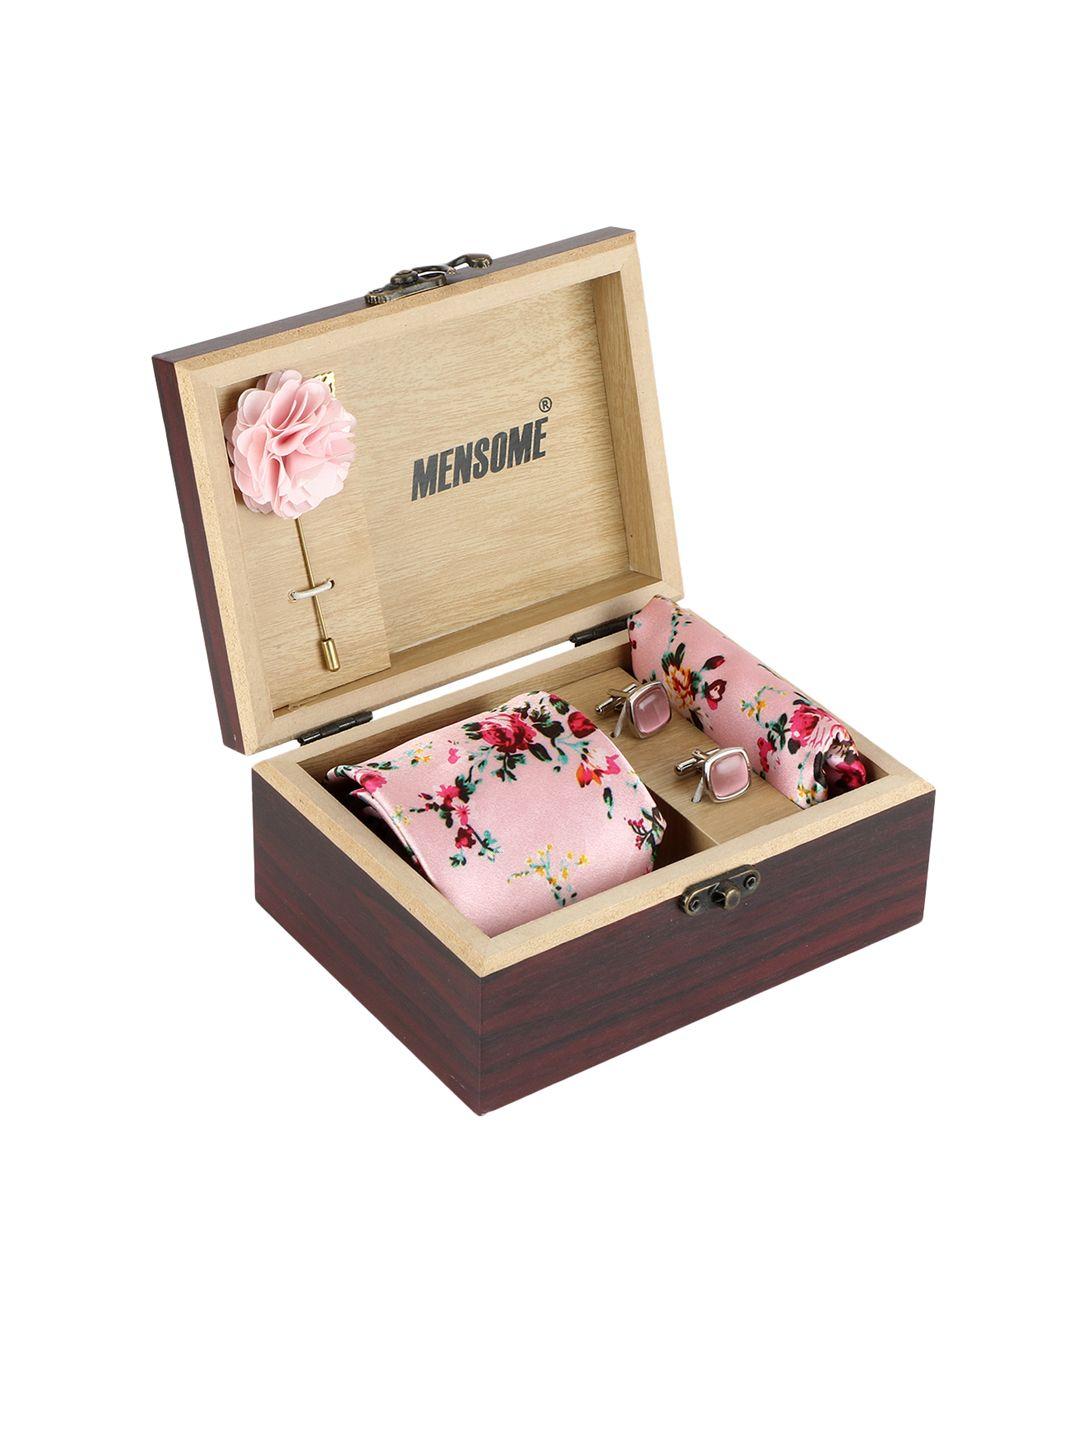 mensome men pink & green printed accessory gift set